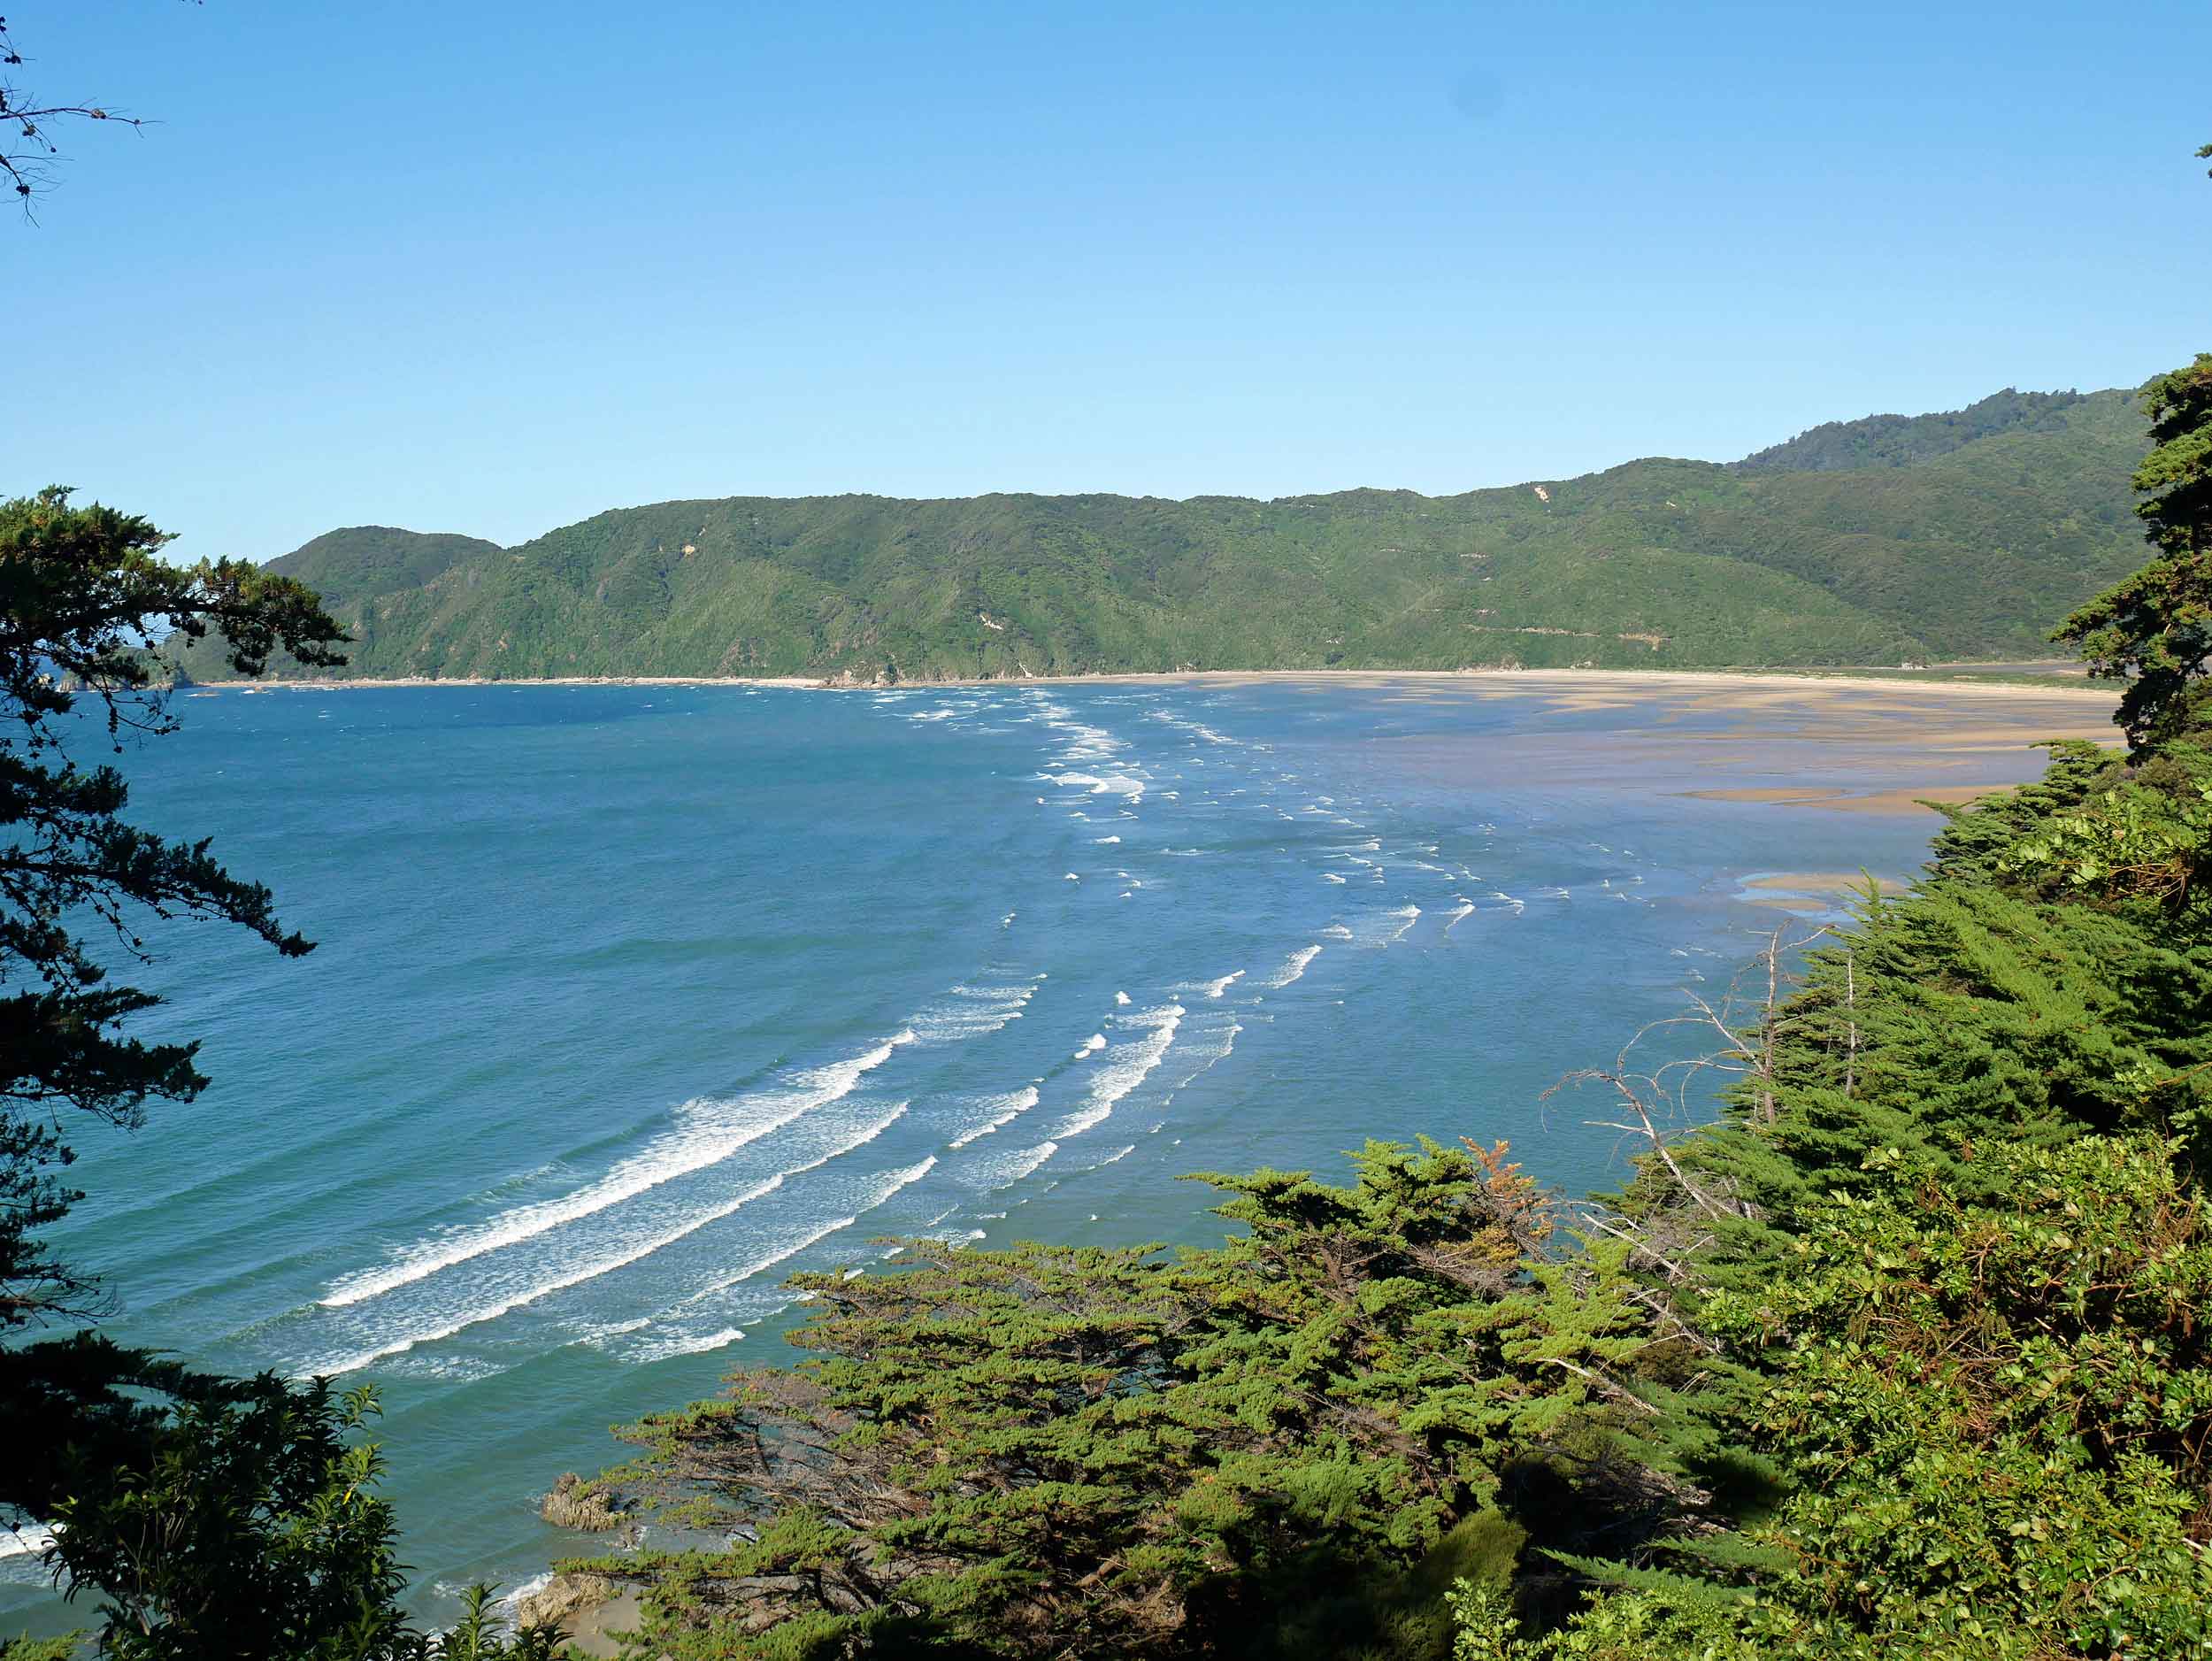  The rolling, windswept waves of Wainui Bay reminded us of the beaches of Hawaii (Jan 16).&nbsp; 